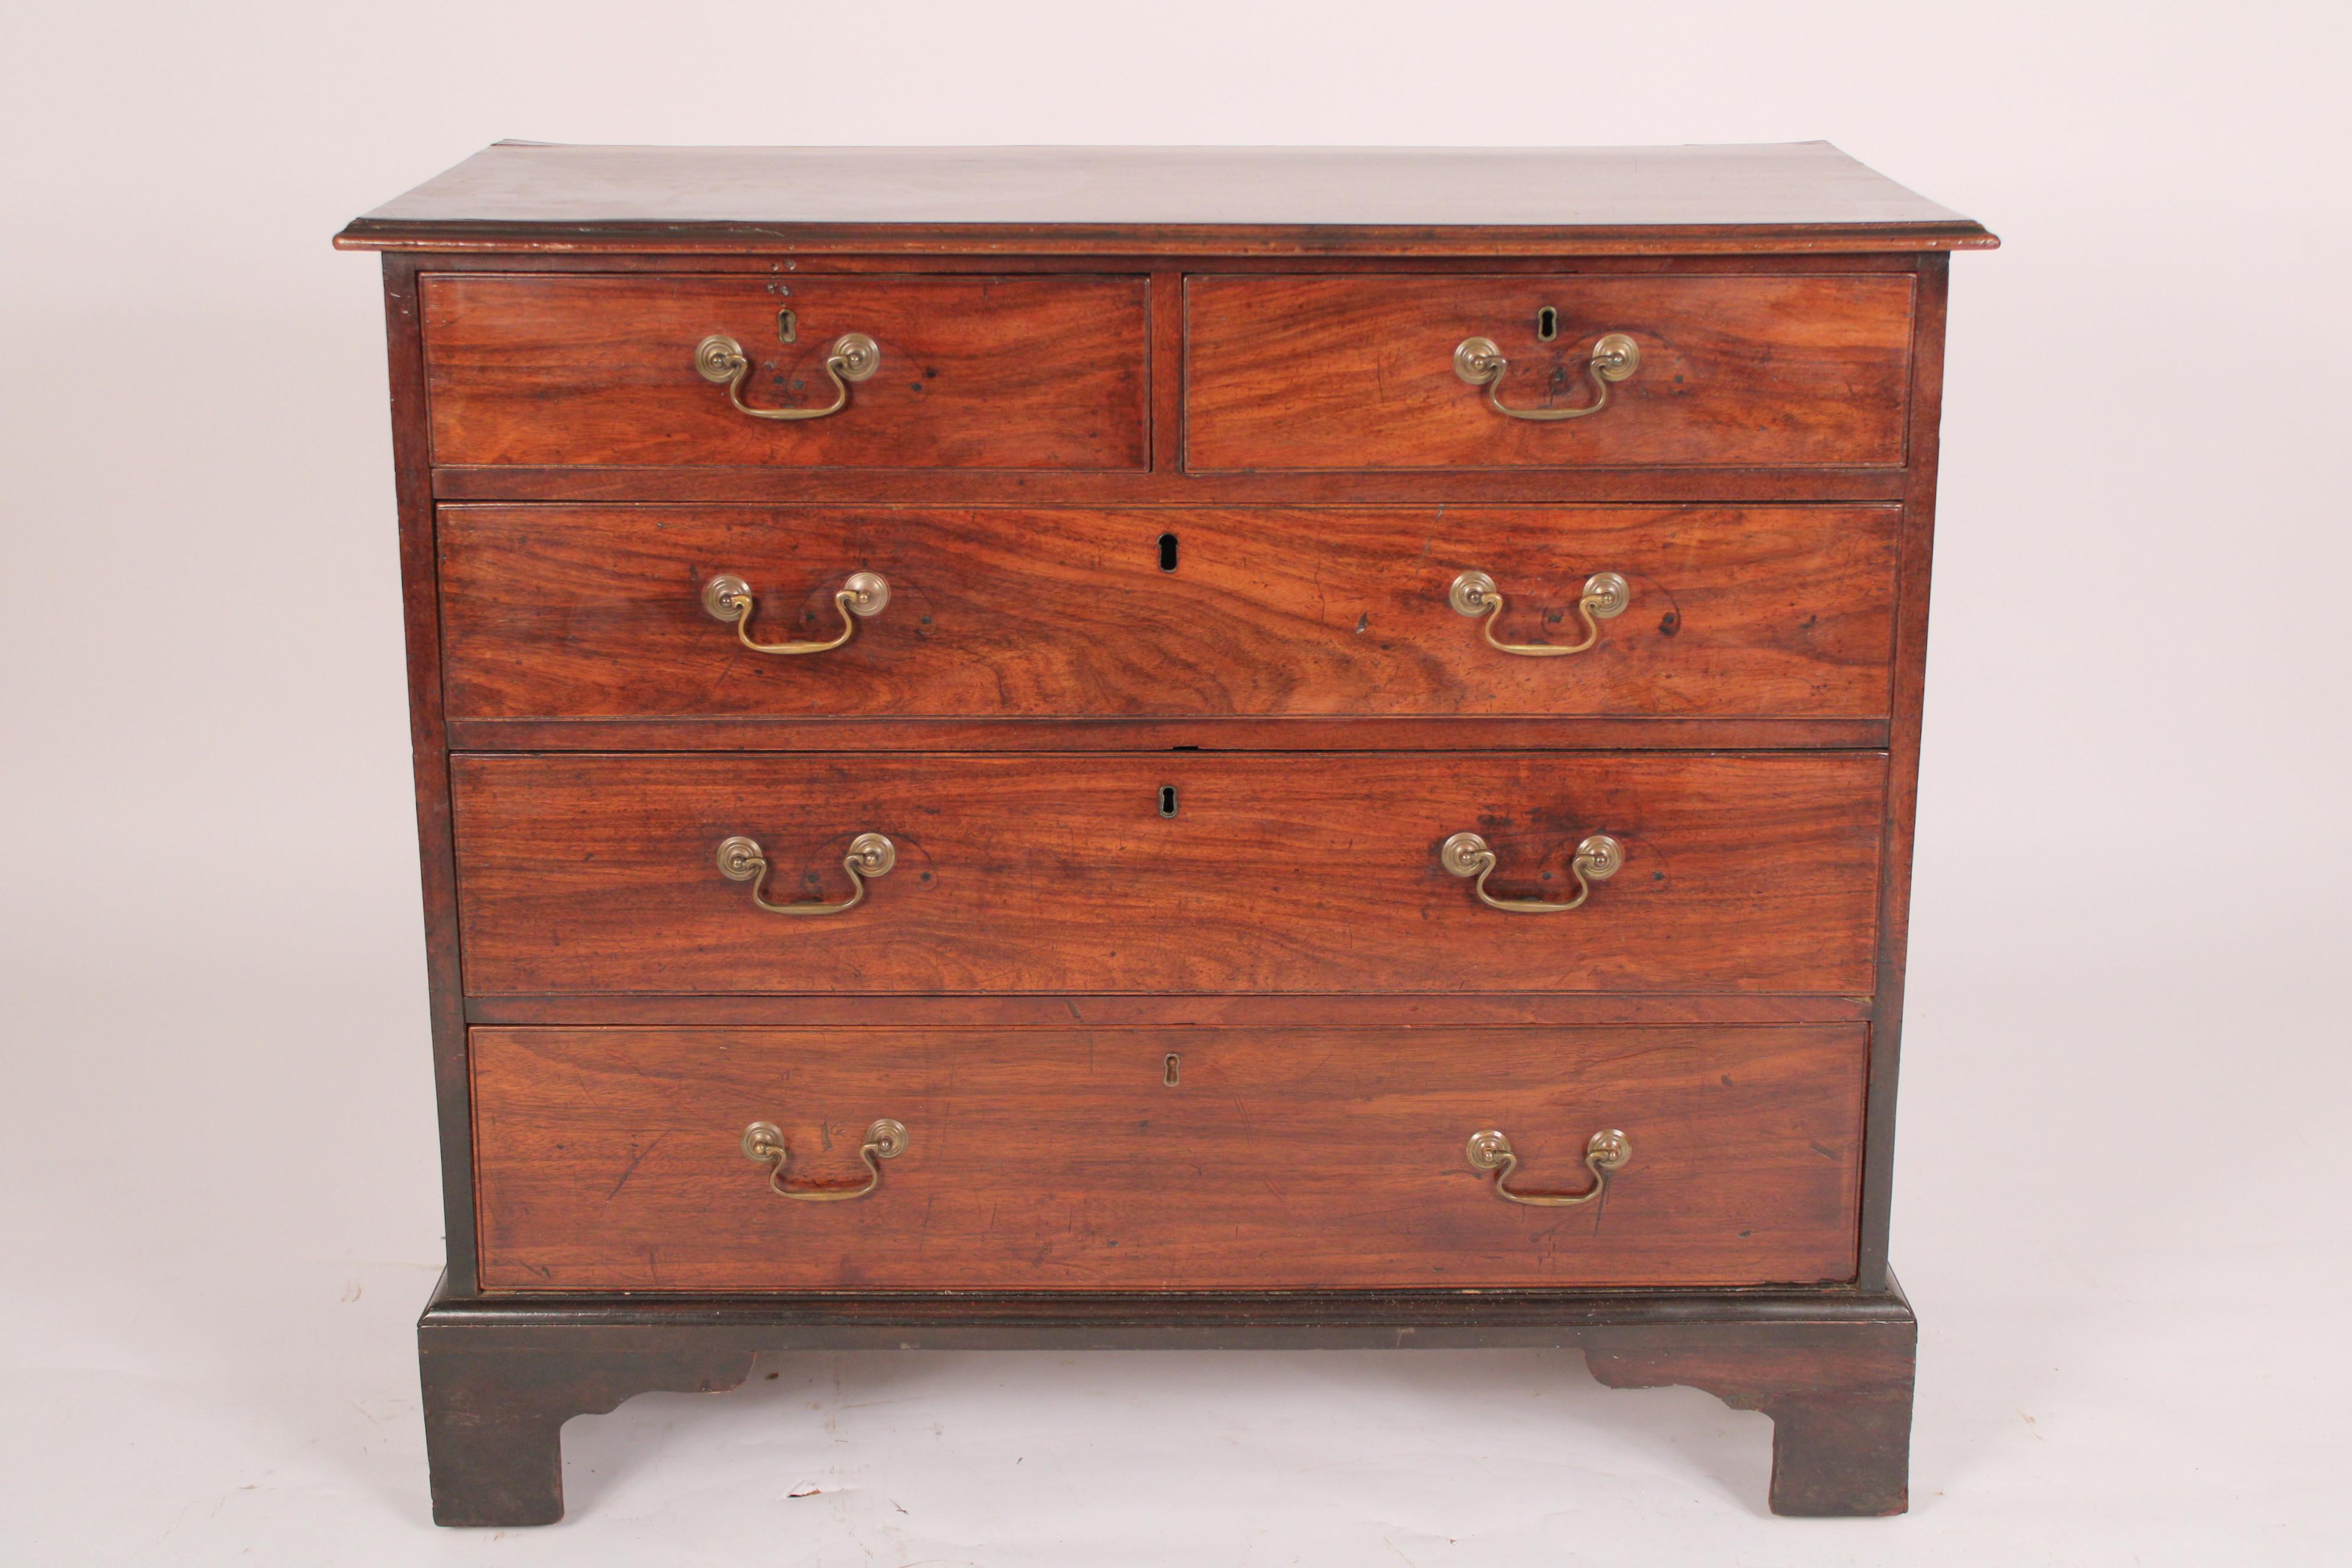 George III mahogany chest of drawers, 18th century with restorations. Having a rectangular two board top with thumb molded front and side edges, two top drawers and 3 lower drawers, resting on bracket feet. Formerly sold by Richard Gorham Antiques,